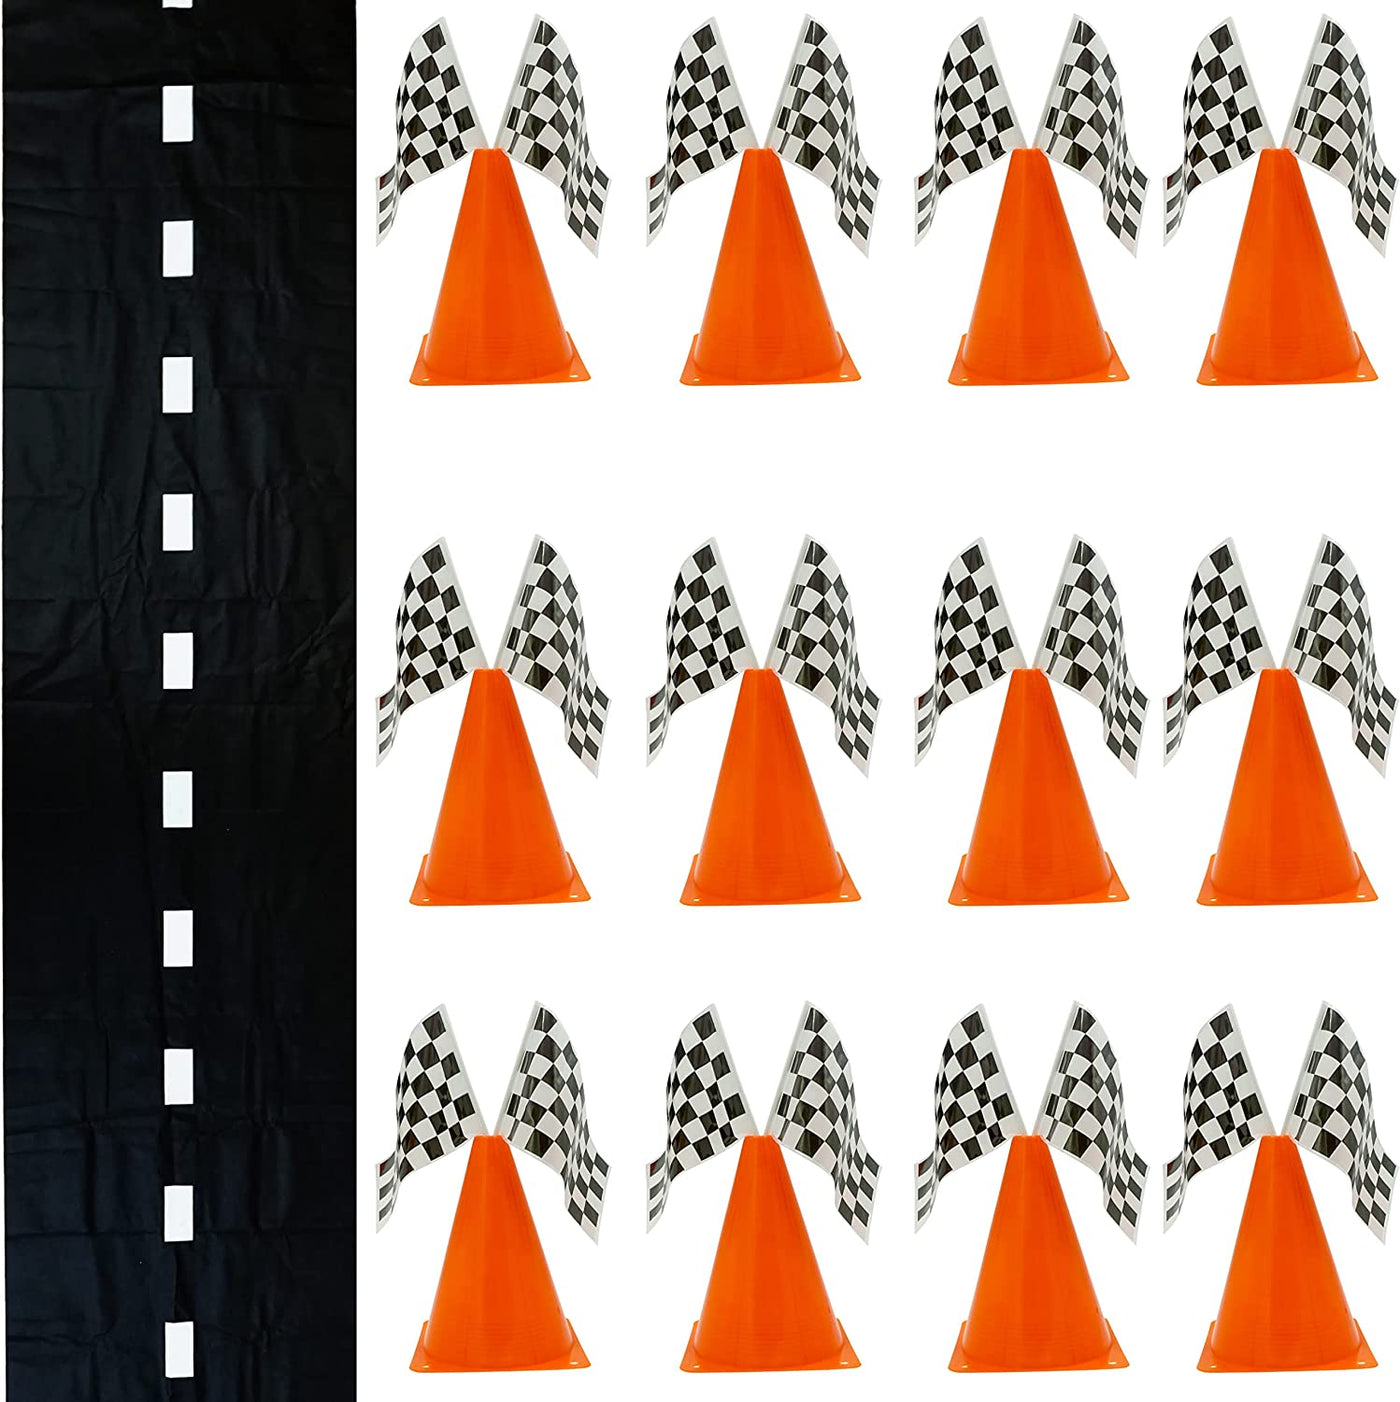 38 Pcs Set - 12 Traffic Cones With Hole on Top, 24 Checkered Flags, Racetrack Floor Runner - for For Race Car Birthday Party Supplies, Racing Theme Decorations for Kids by 4E's Novelty